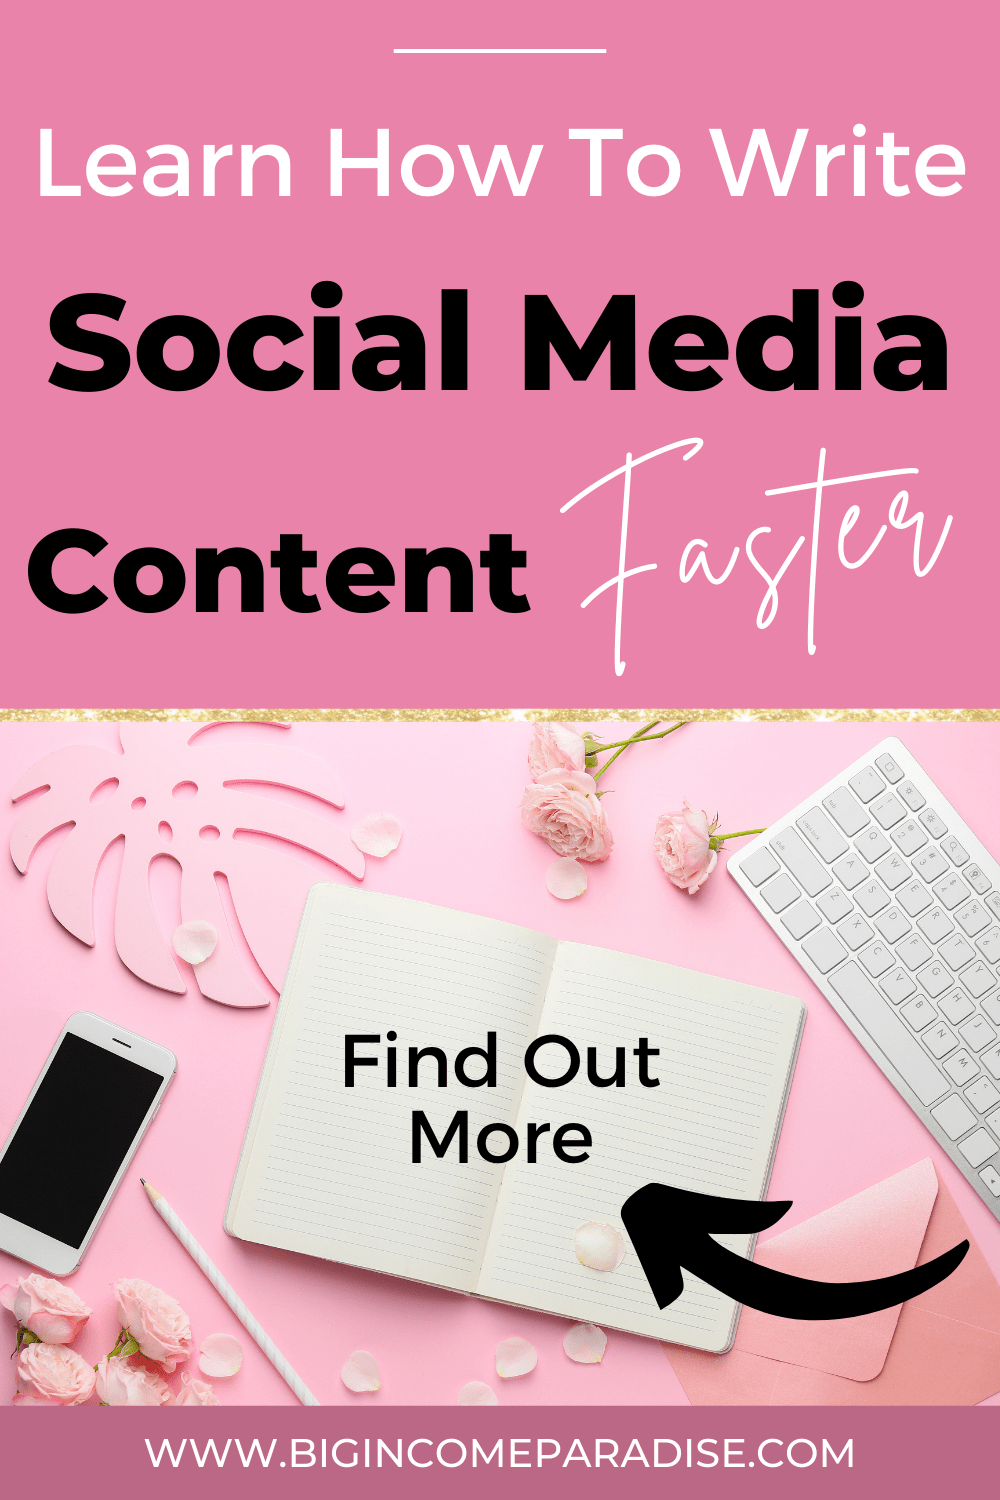 Learn How To Write Social Media Content Faster | Big Income Paradise